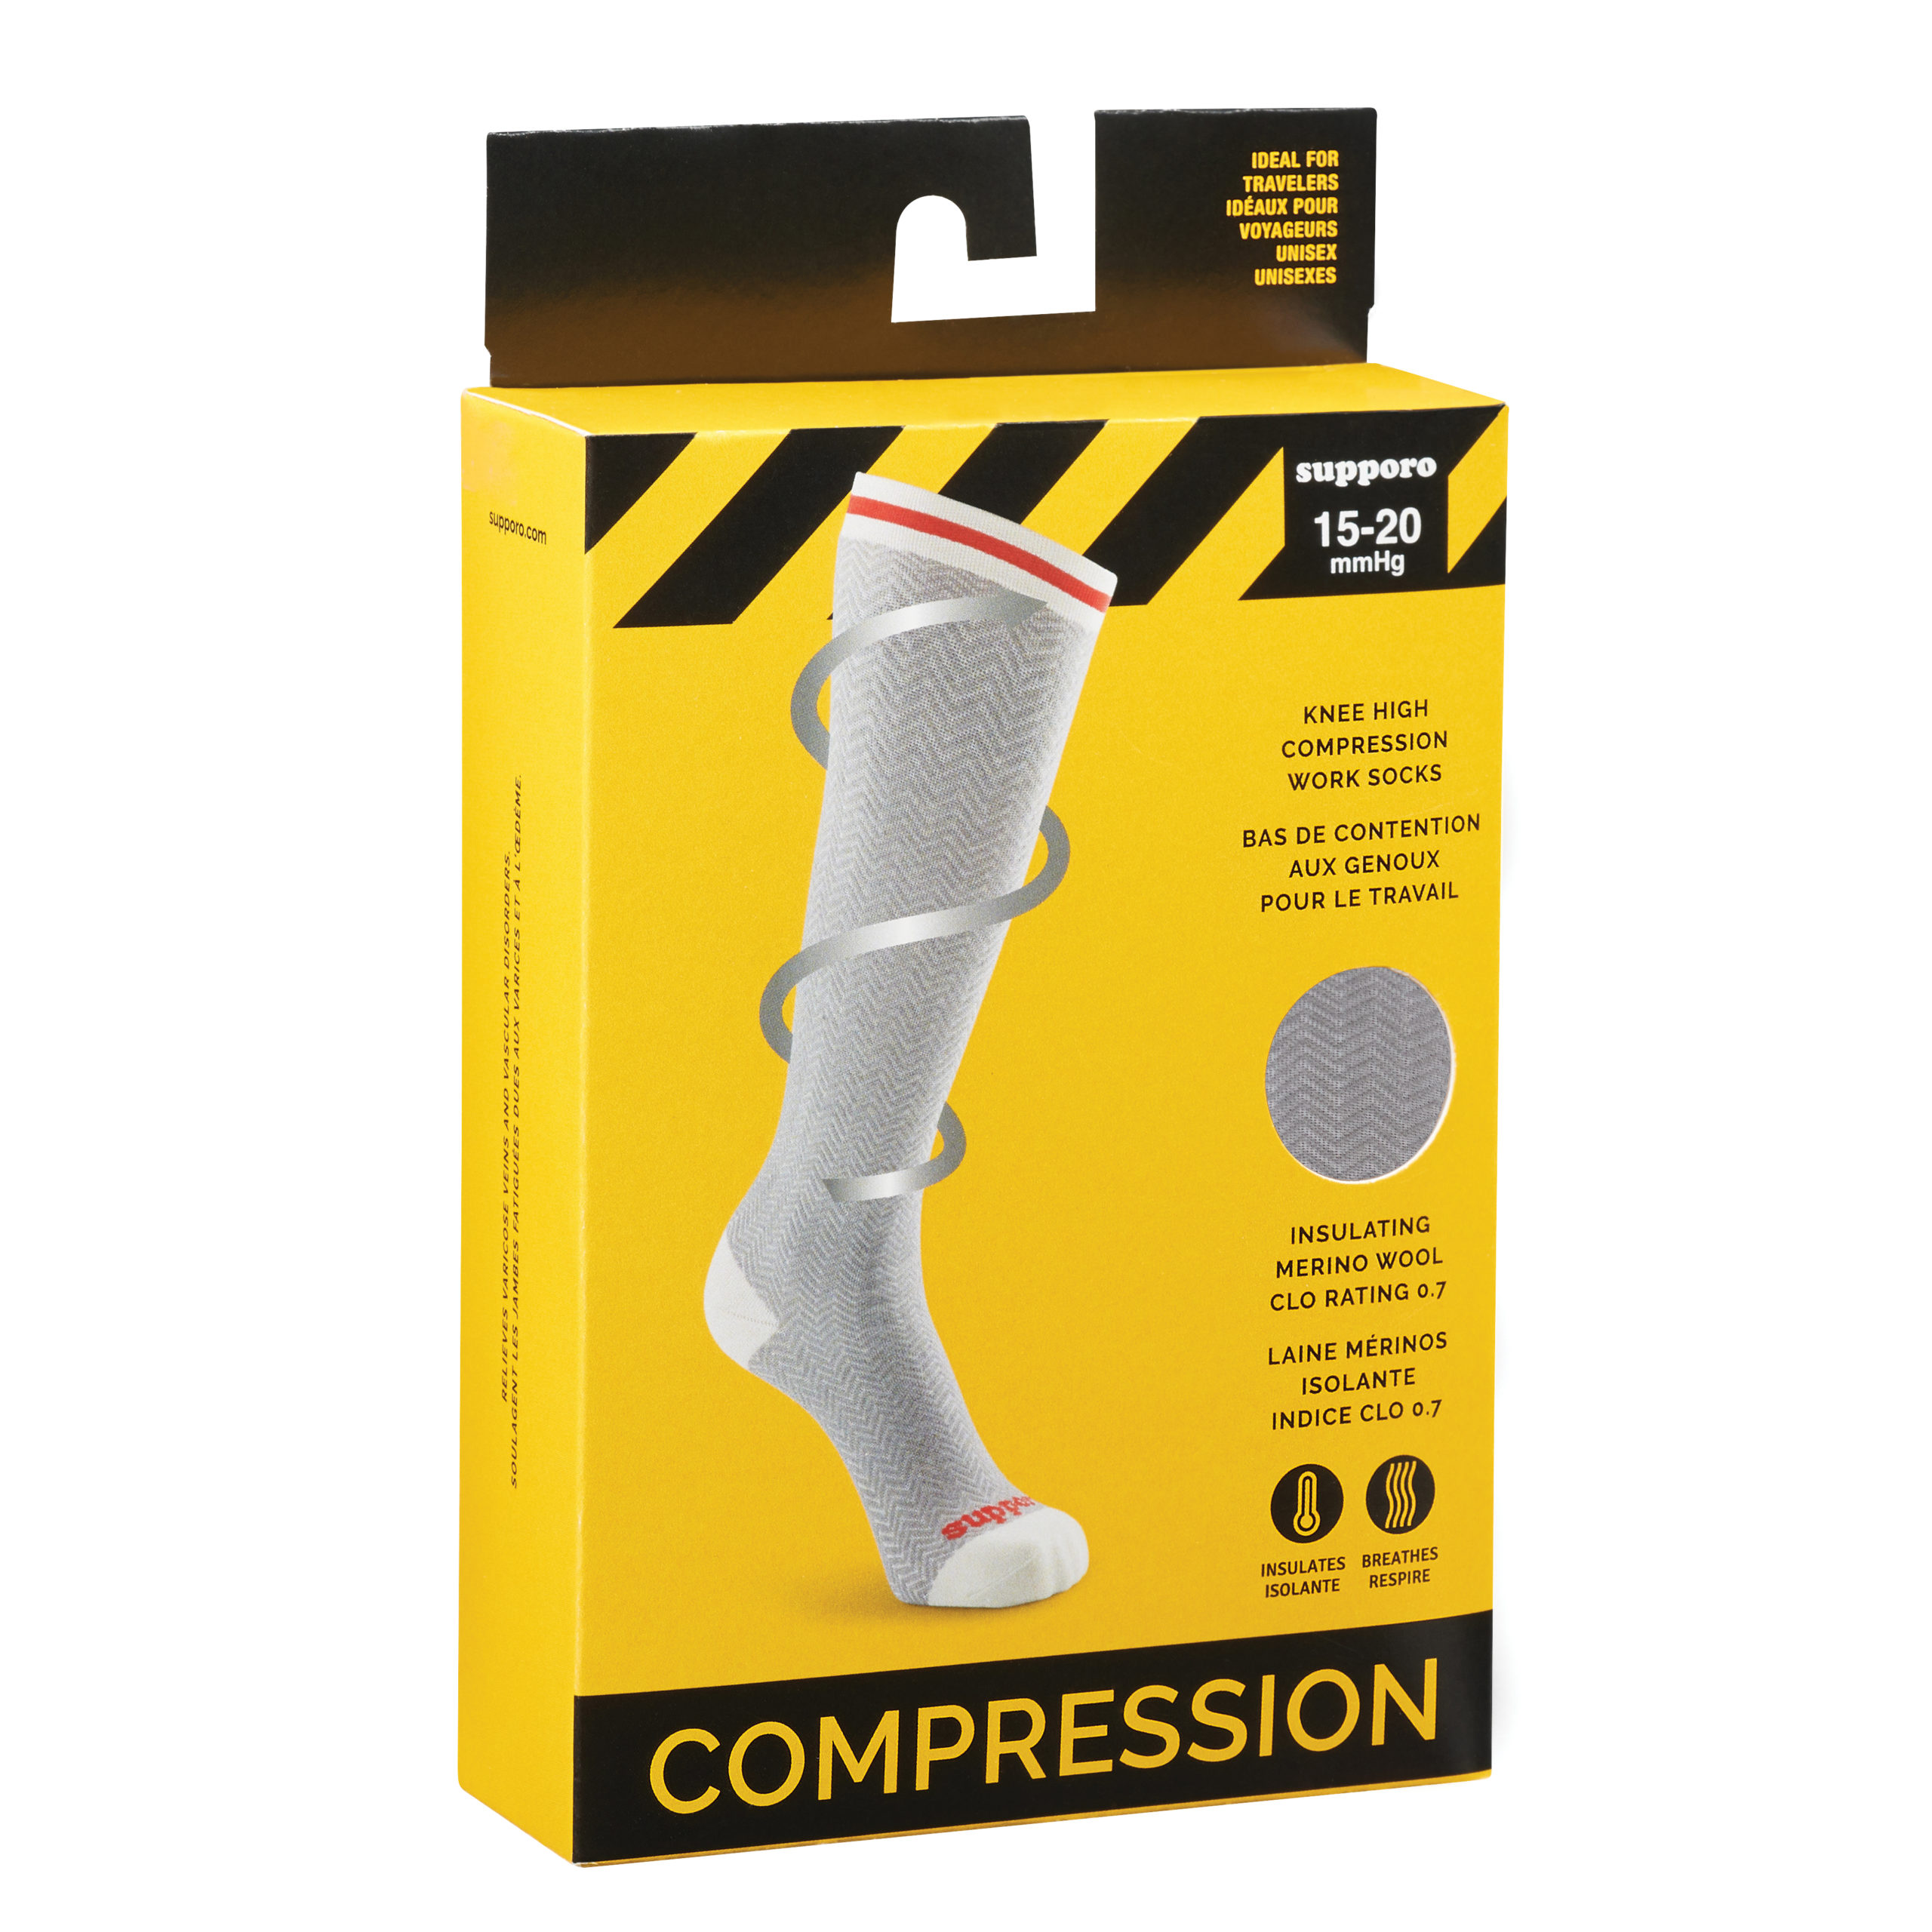 Wash & Care Guide for Compression Garments - Absolute Medical, Inc.